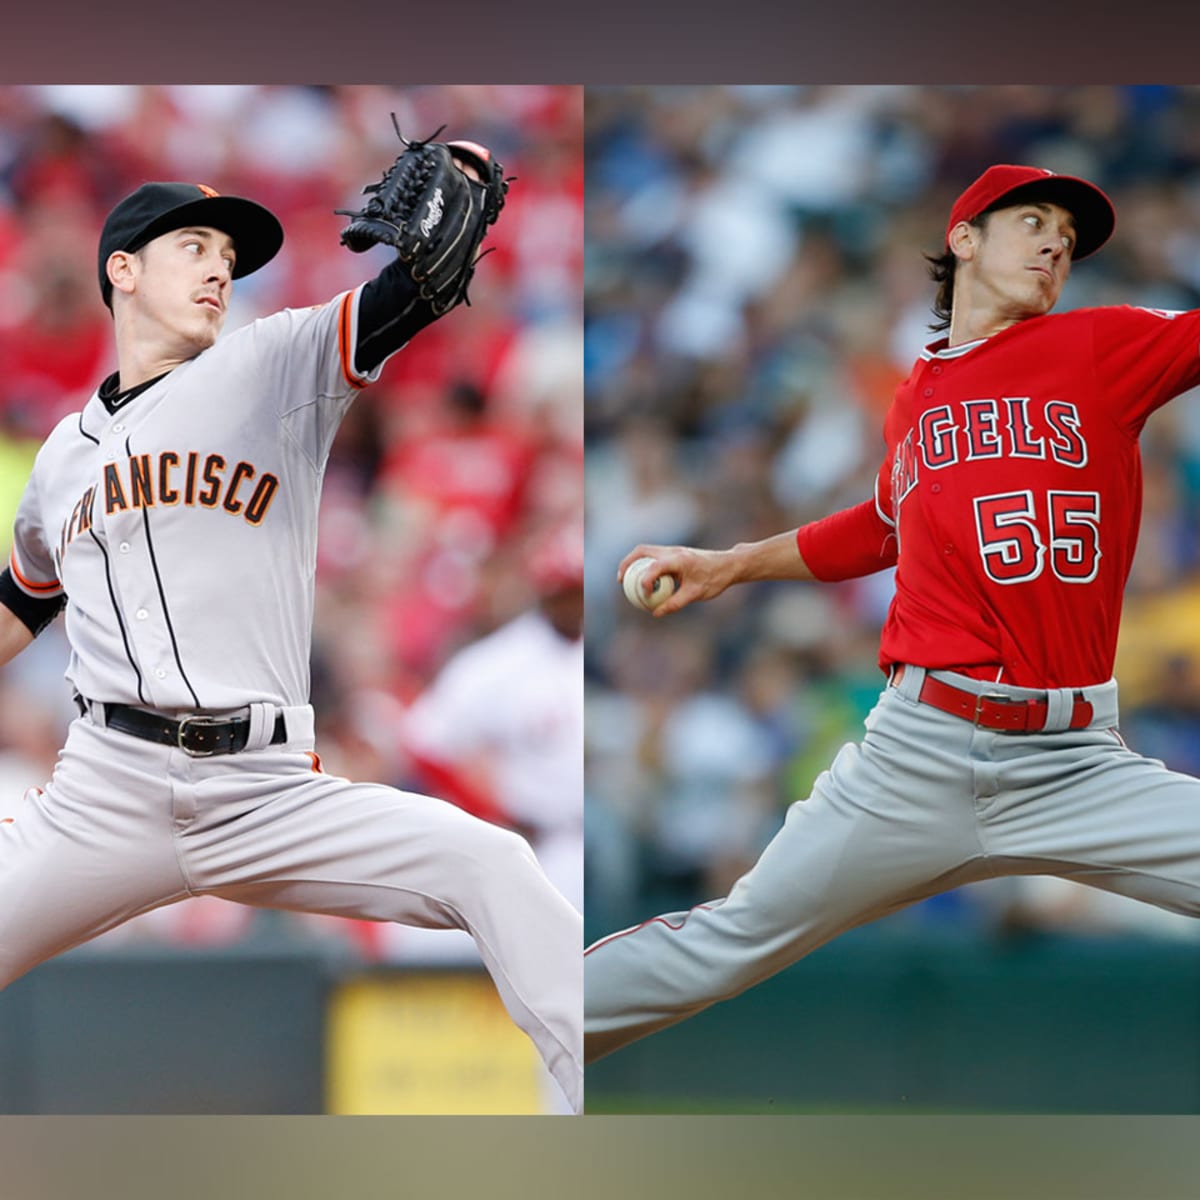 Tim Lincecum Looks Jacked in New Photo—and He Could Be Eyeing an MLB  Comeback - Men's Journal